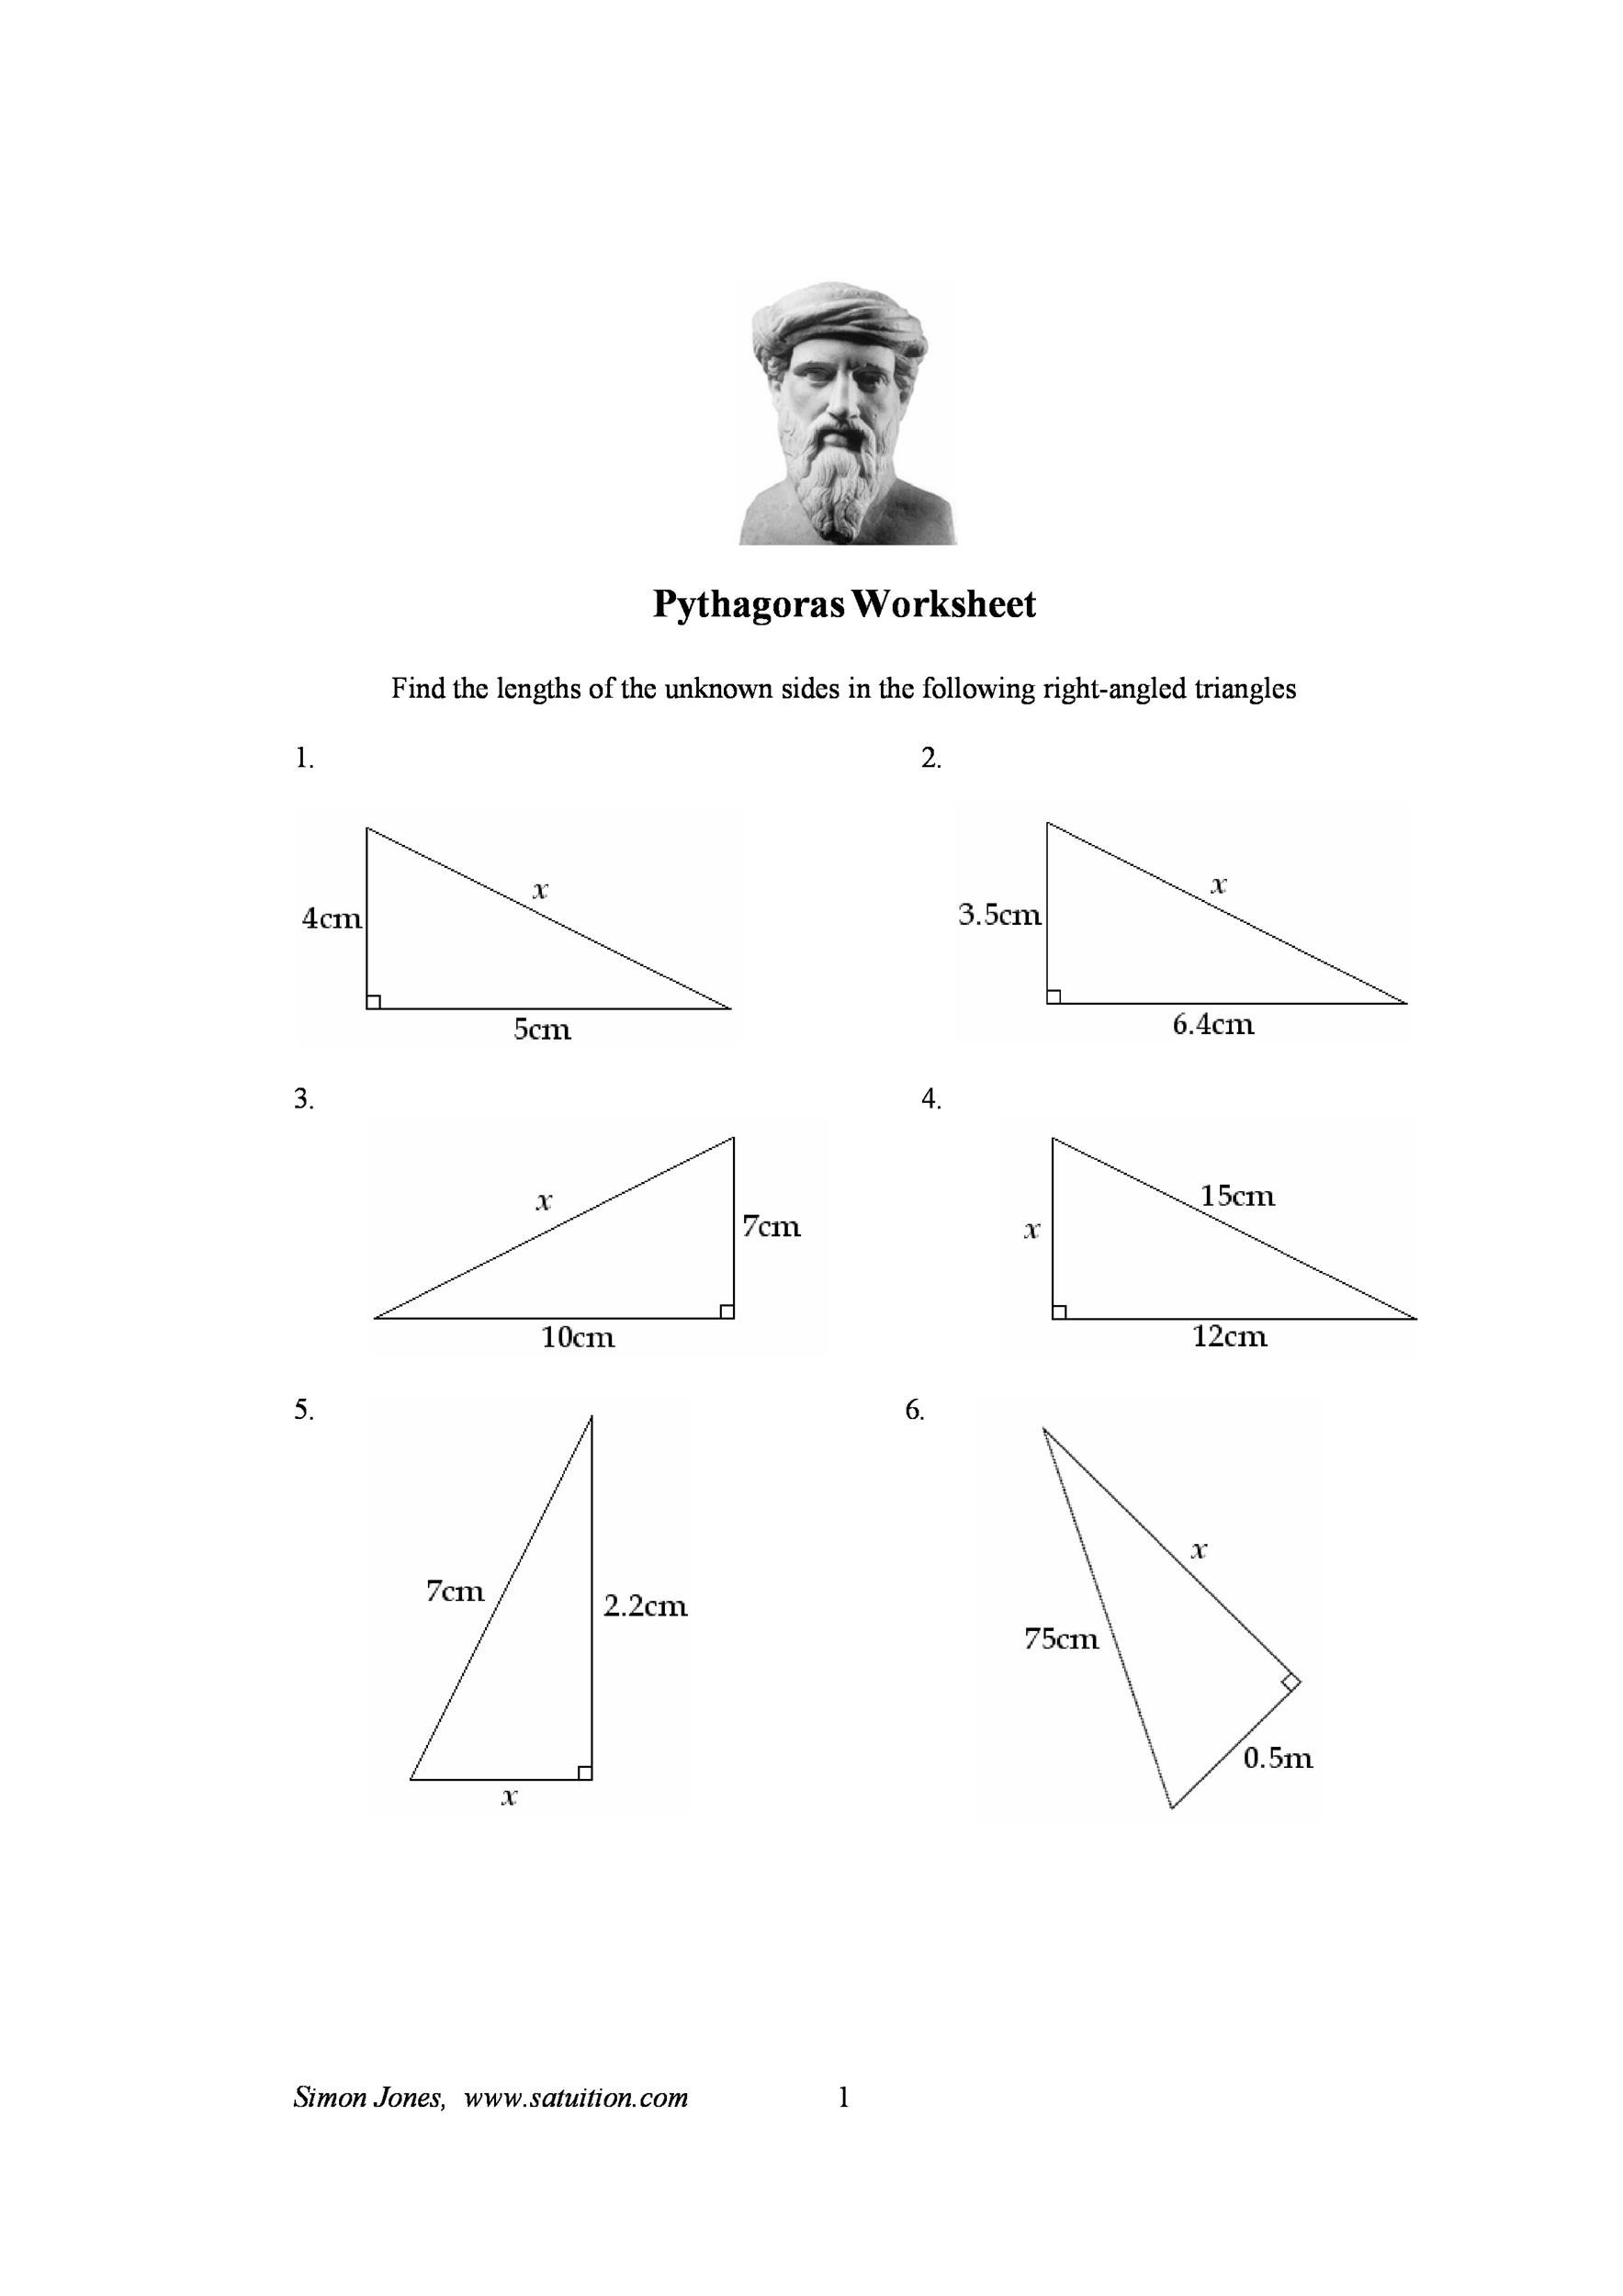 48-pythagorean-theorem-worksheet-with-answers-word-pdf